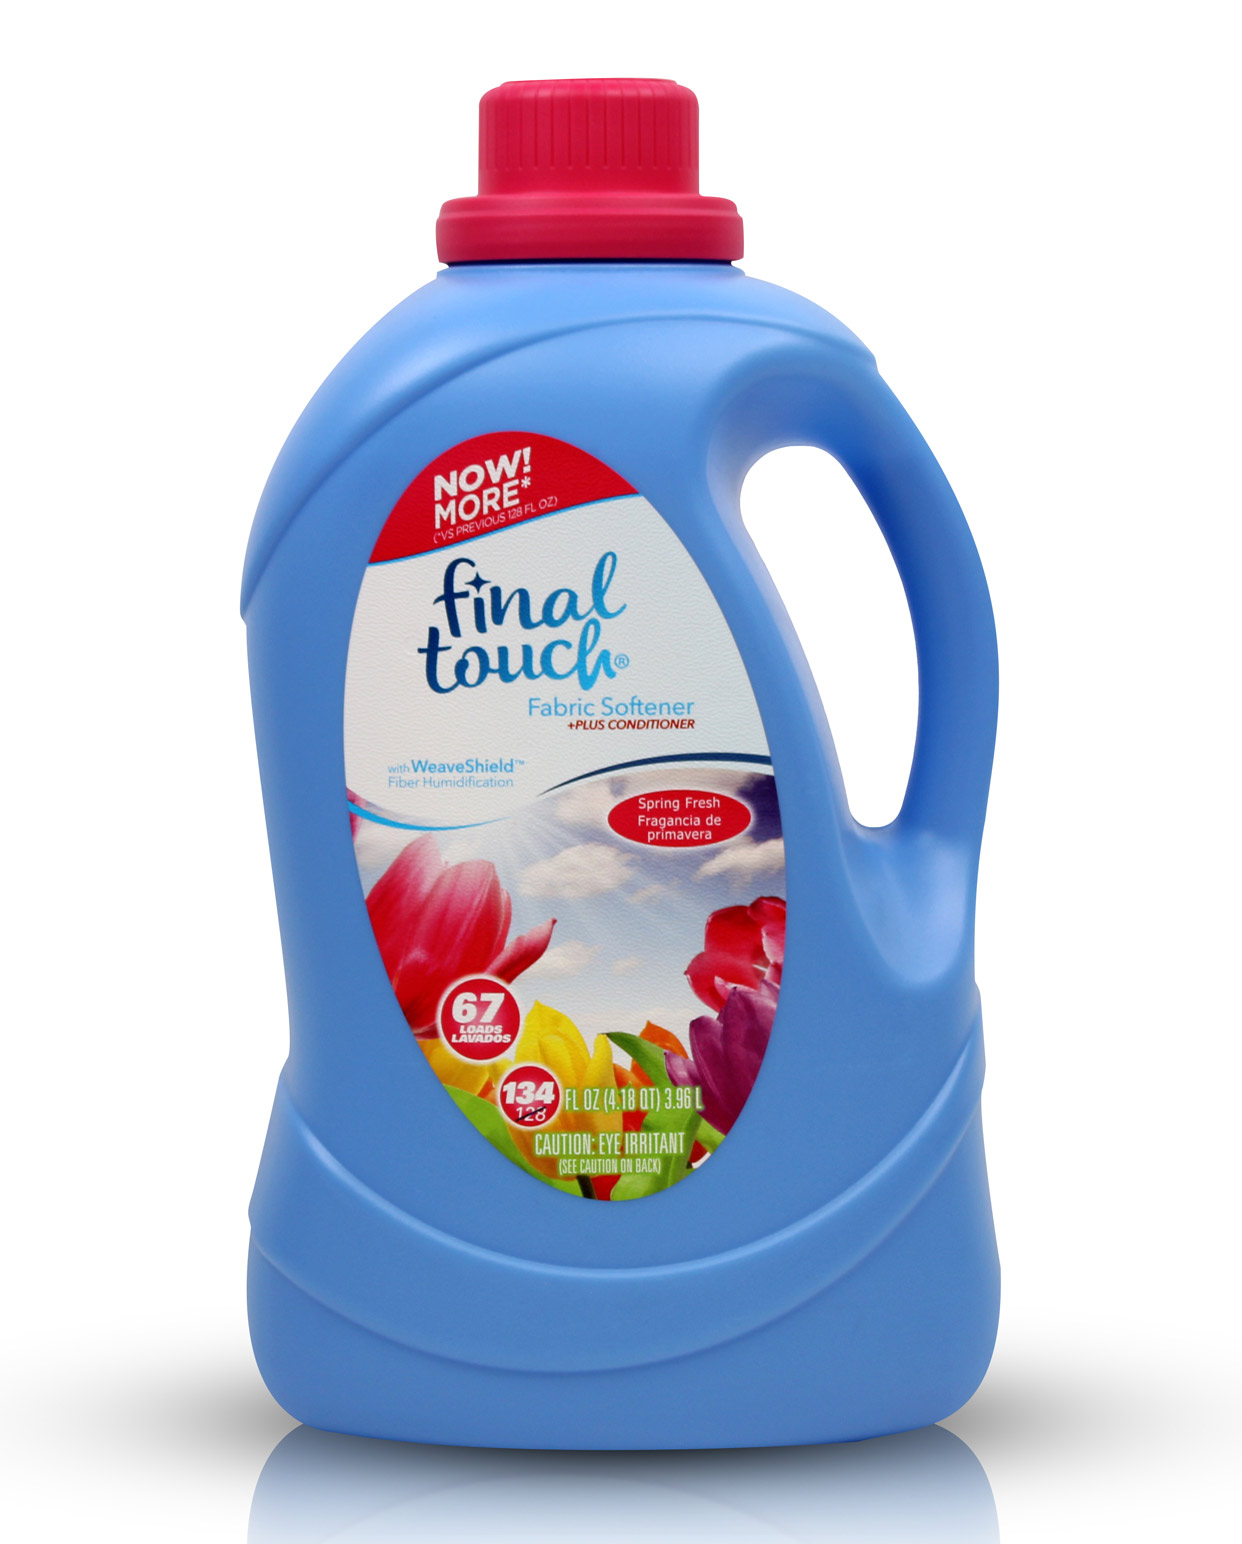 134oz bottle of Laundry Fabric Softener with Spring Fresh Scent.